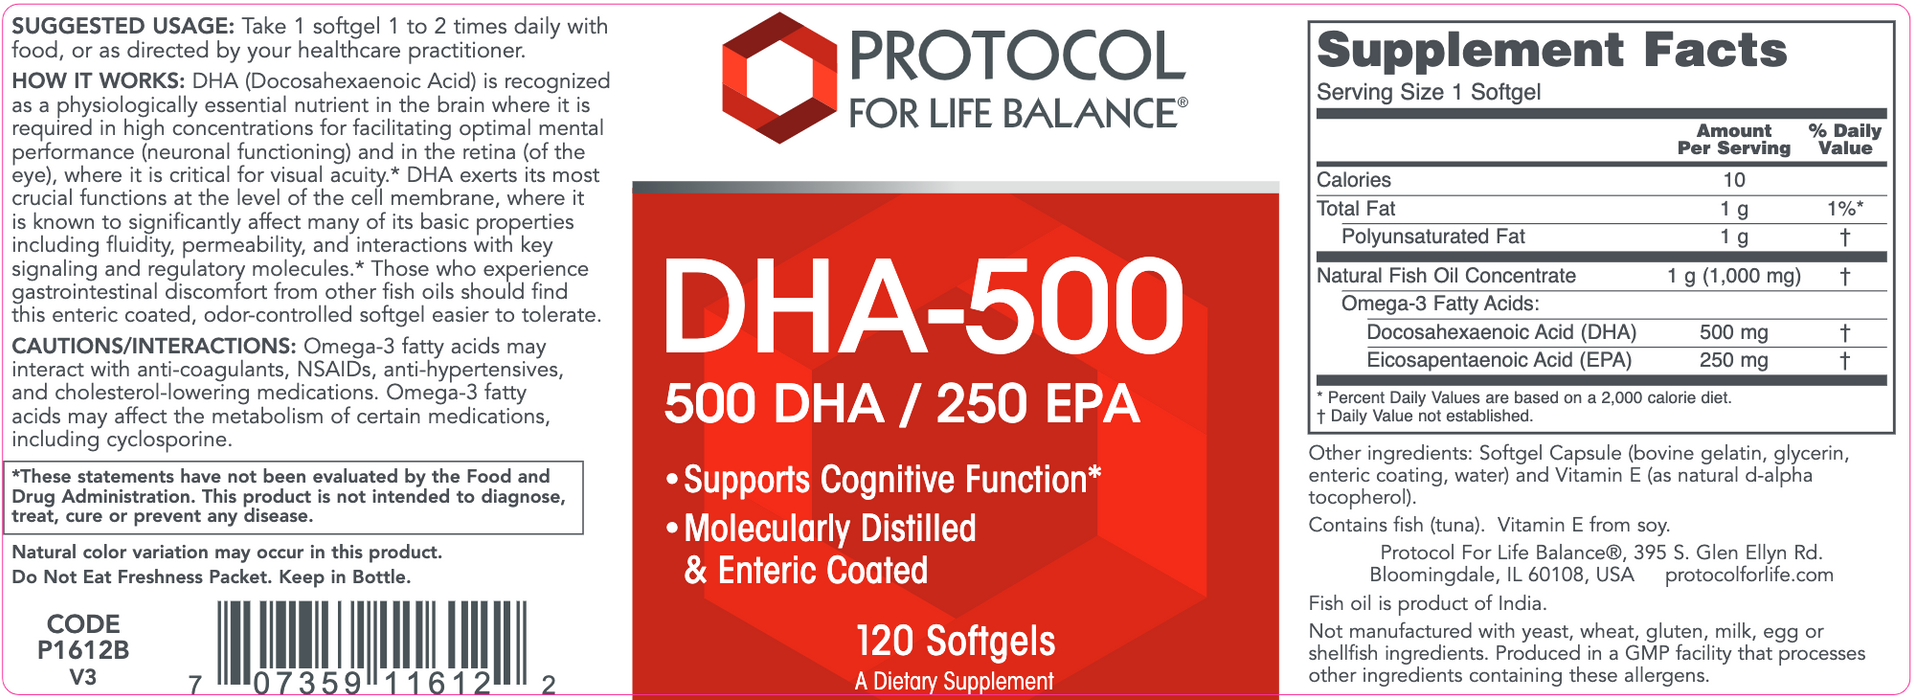 DHA-Vitamins & Supplements-Protocol For Life Balance-500 mg - 120 Softgels-Pine Street Clinic